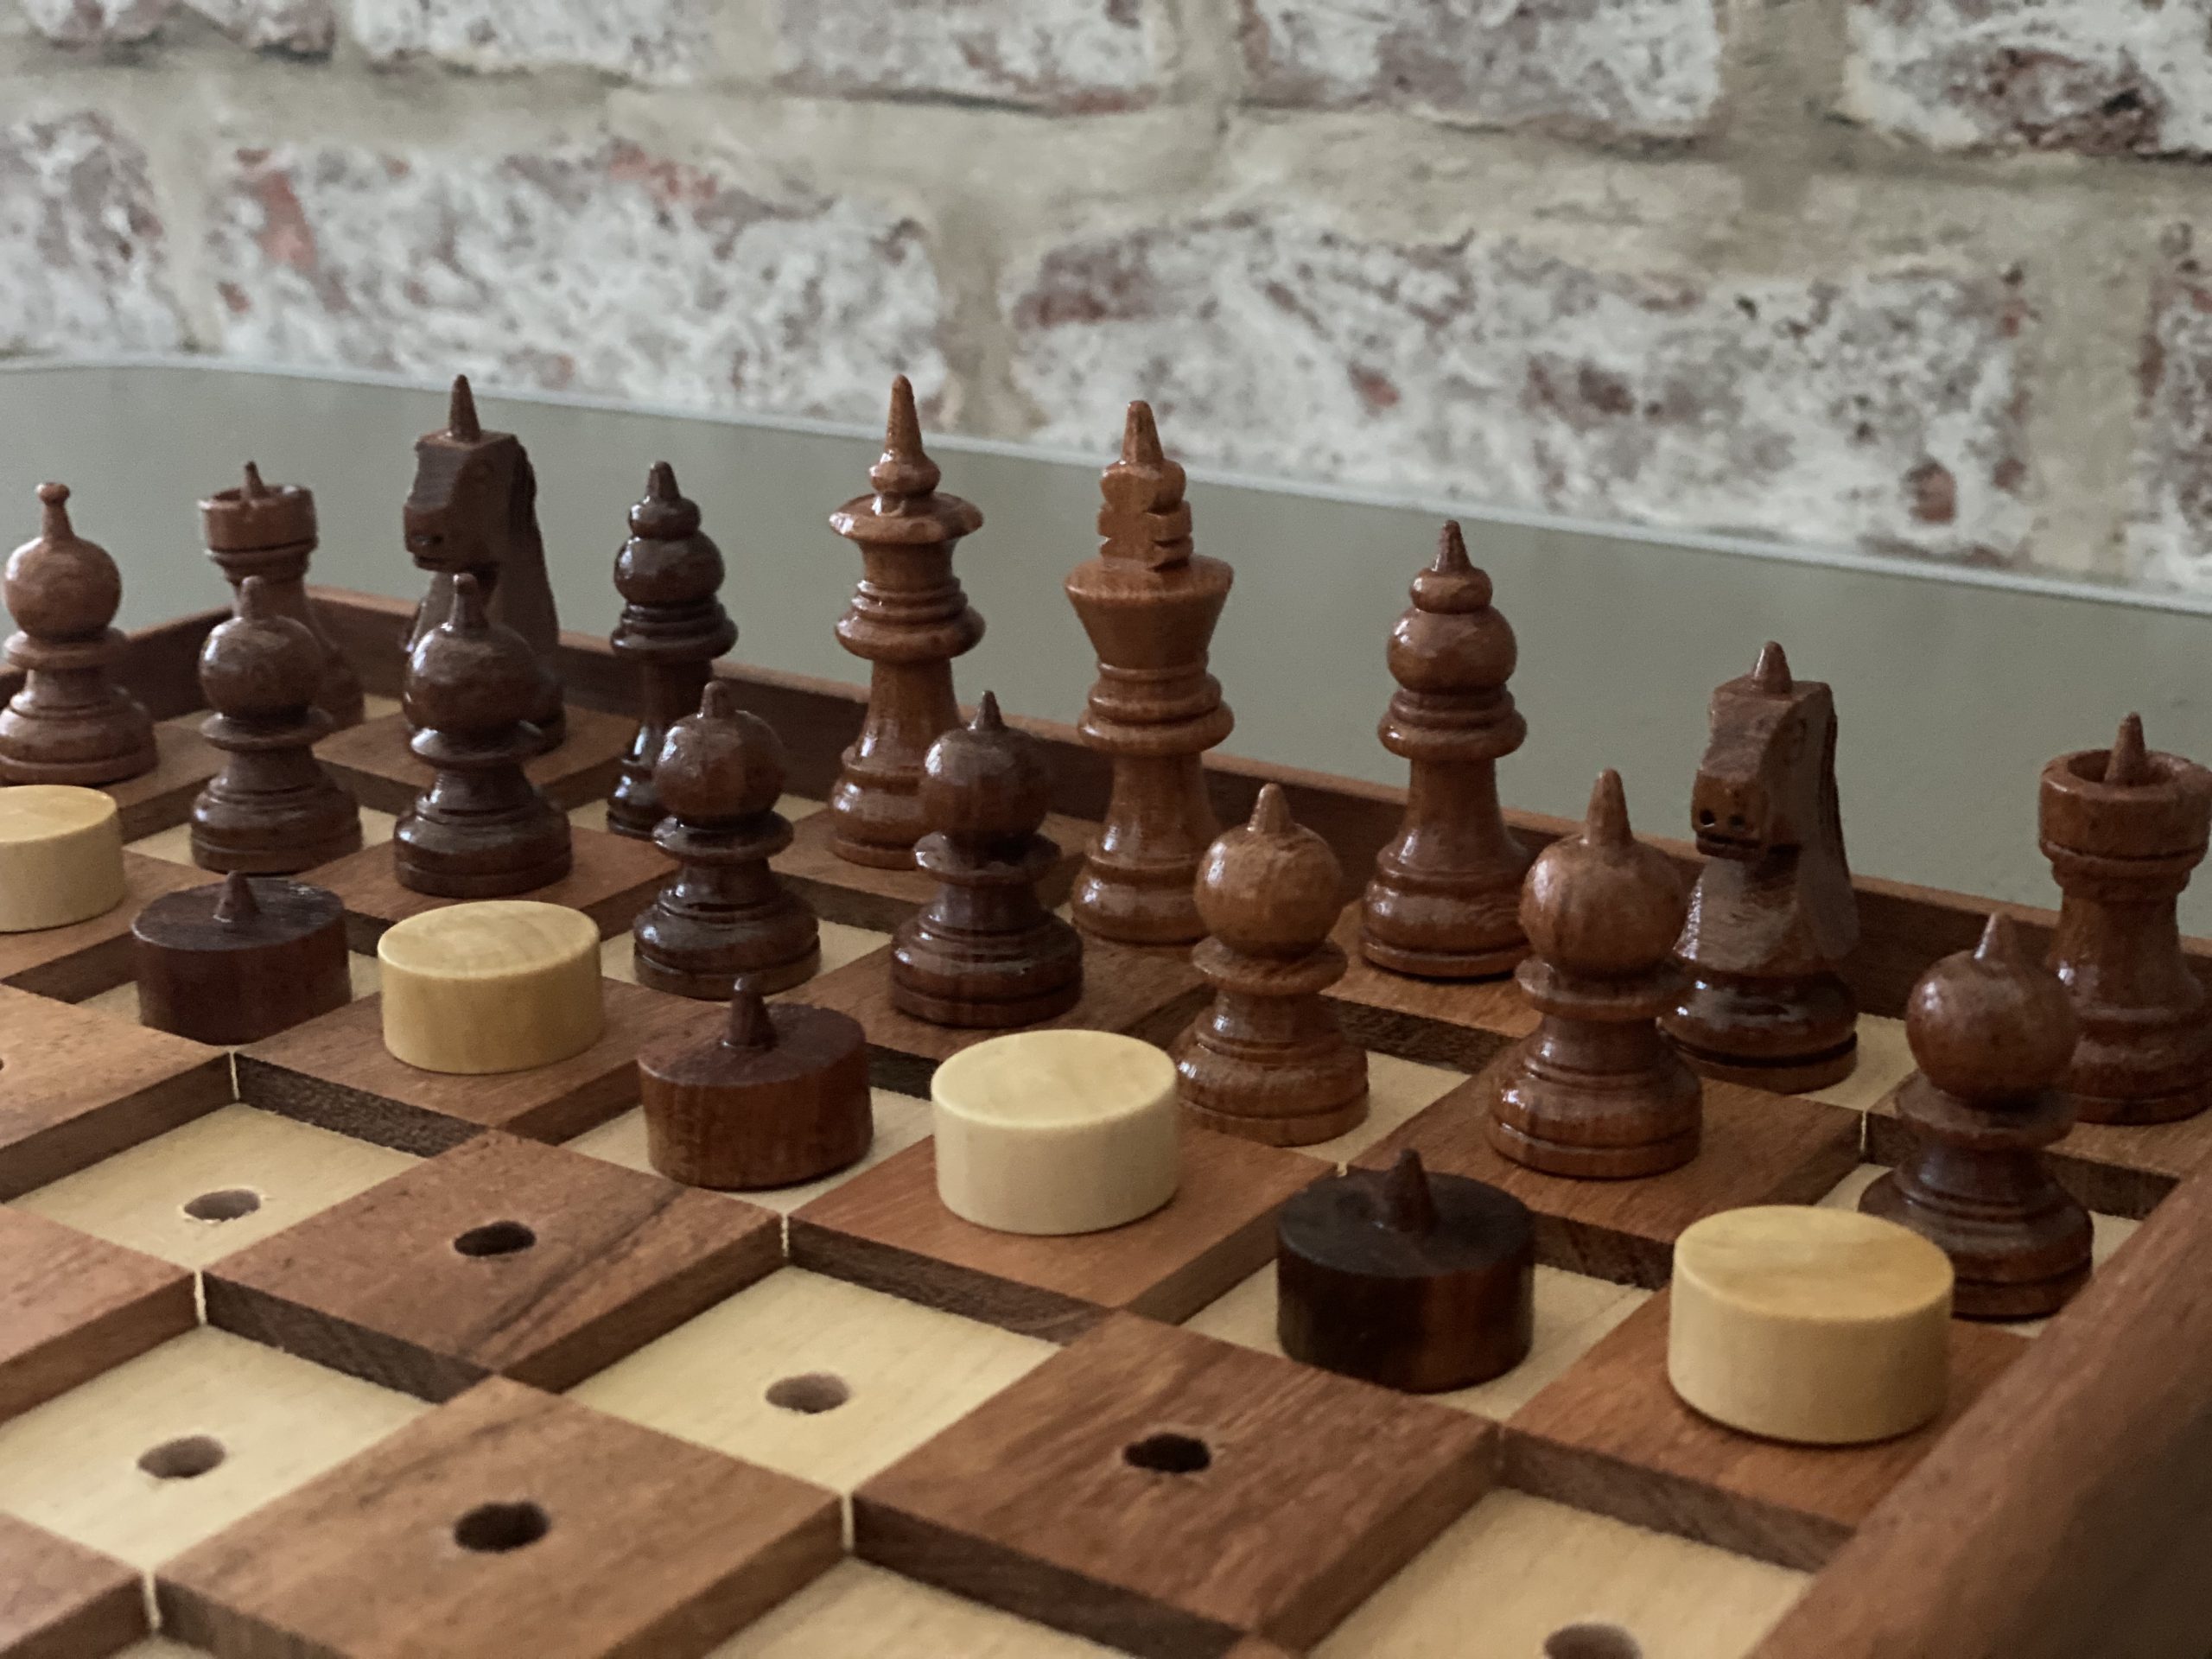 12 Blind Chess Photos, Pictures And Background Images For Free